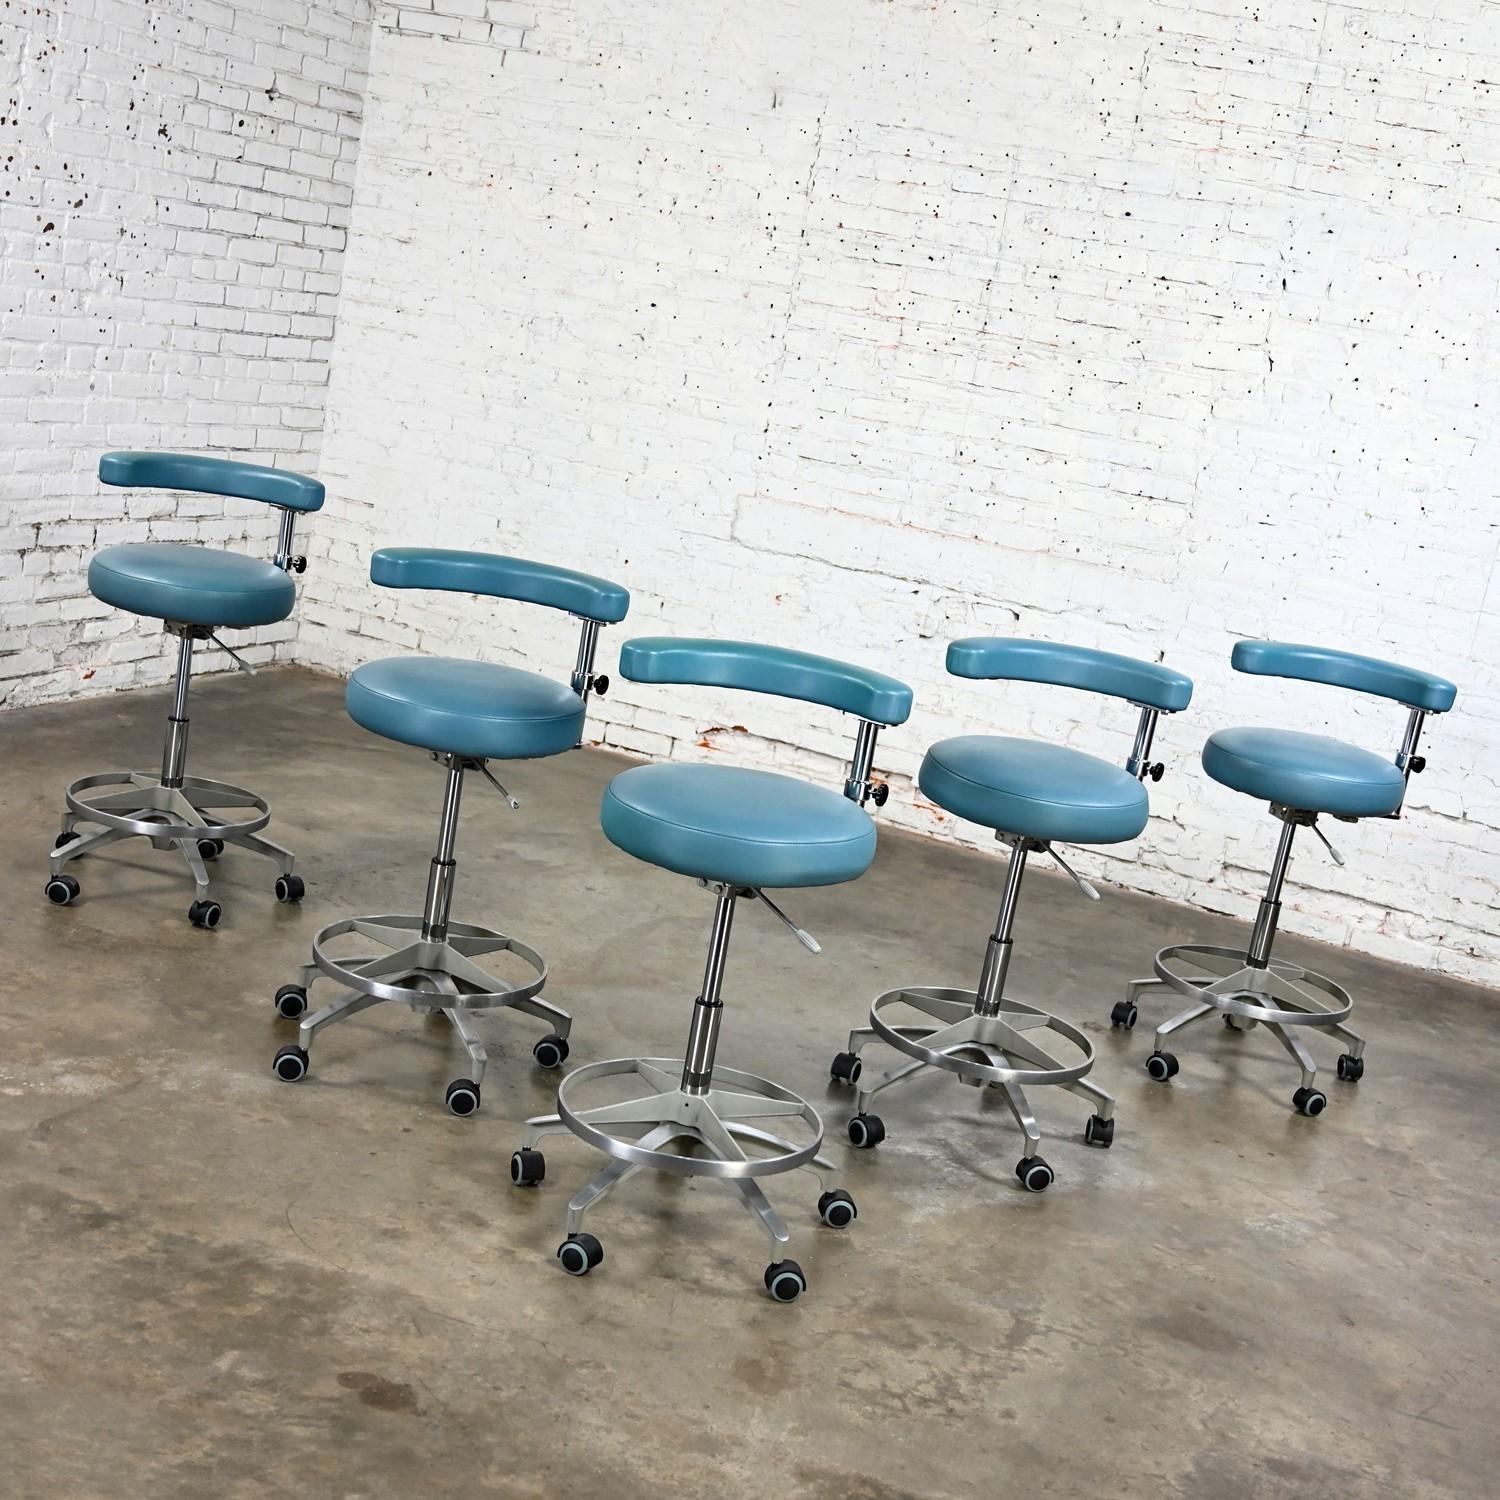 American Late 20th Century Industrial Barstools Steel Blue Faux Leather & Chrome Set 5 For Sale